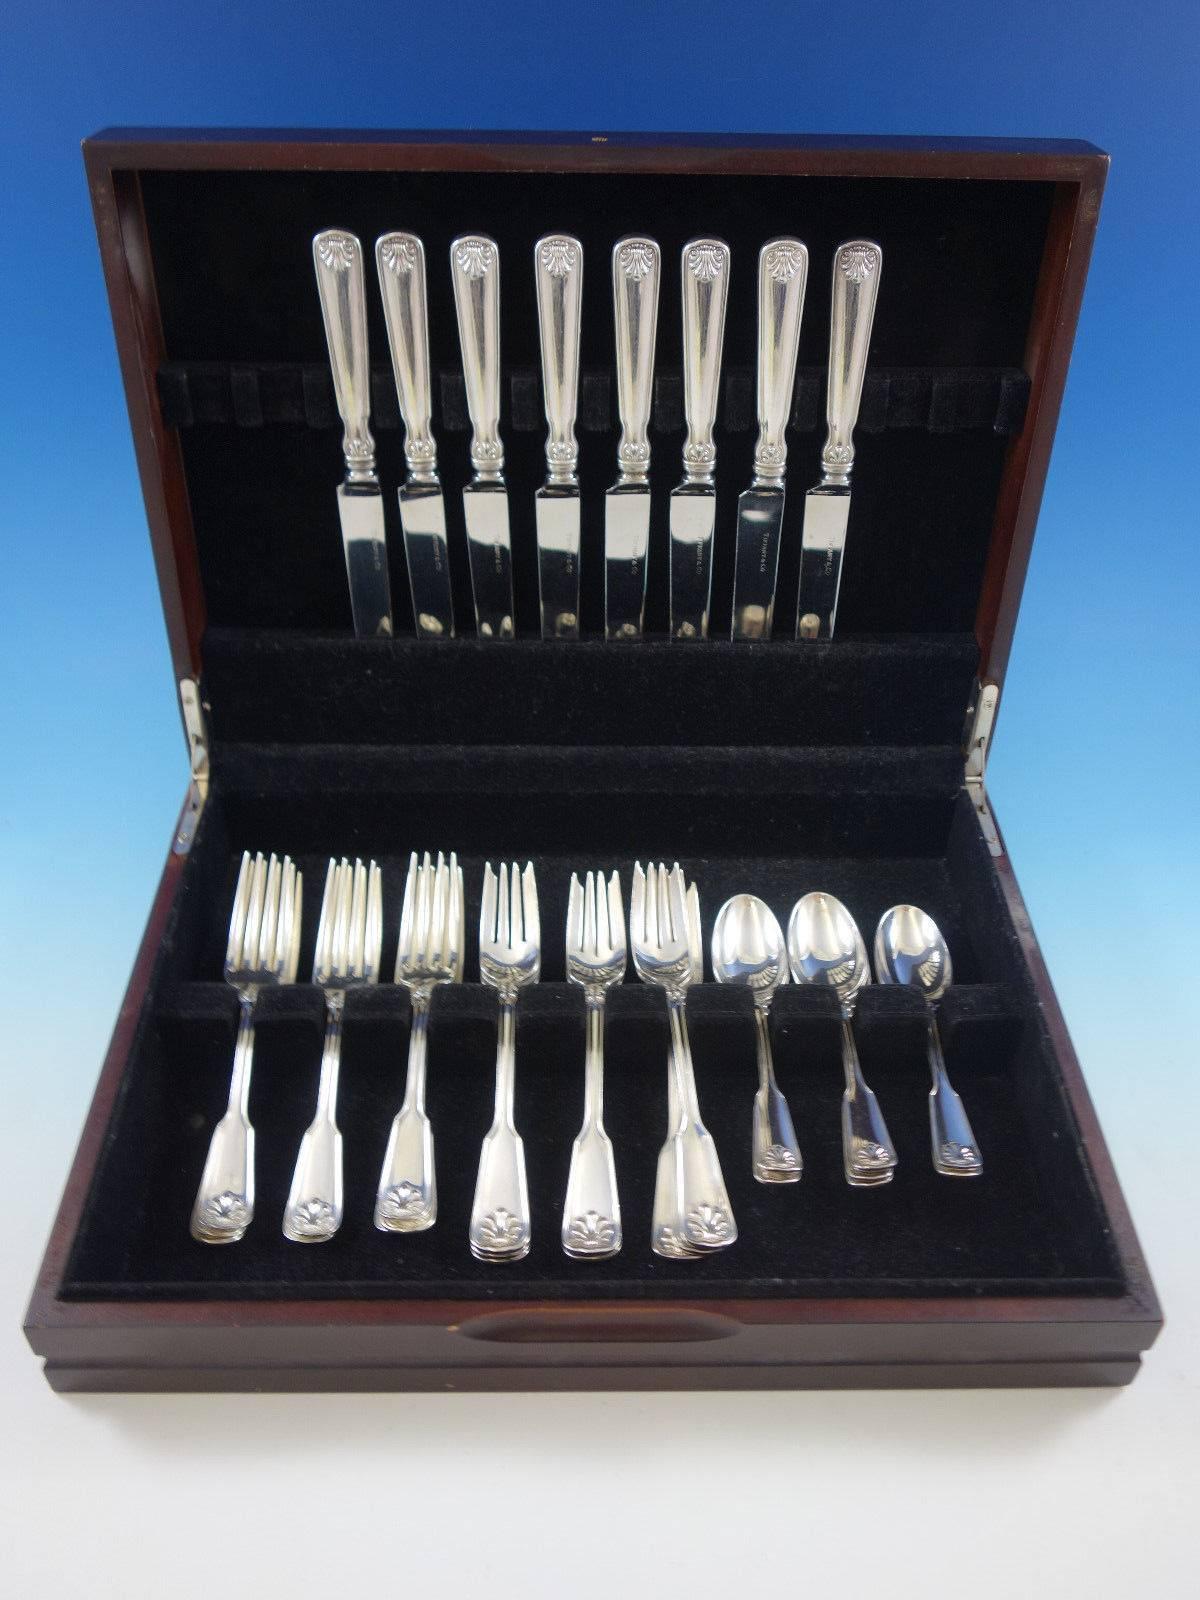 Shell and thread by Tiffany & Co. sterling silver flatware set 32 pieces. This set includes: Eight knives, 9 1/8